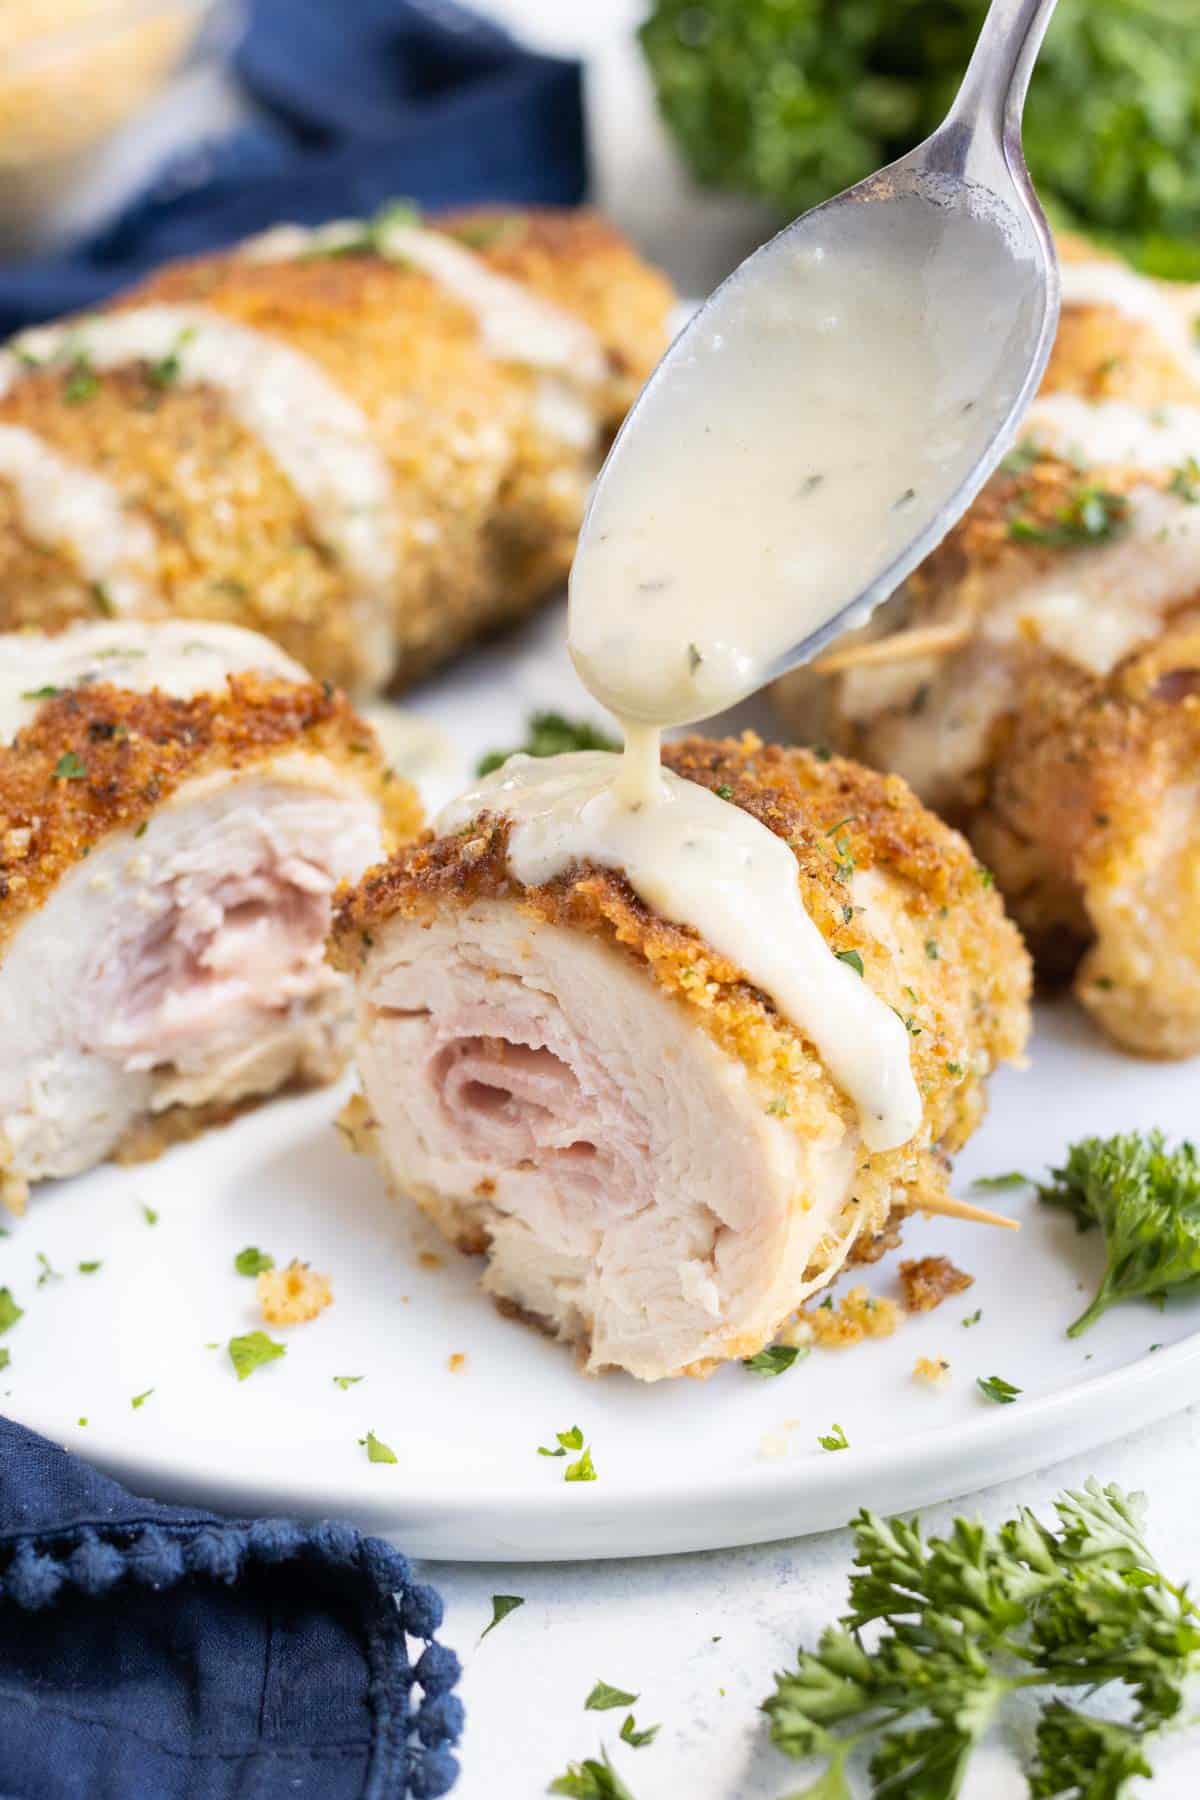 Chicken Cordon Bleu has ham and cheese in the middle and is drizzled with a creamy sauce.